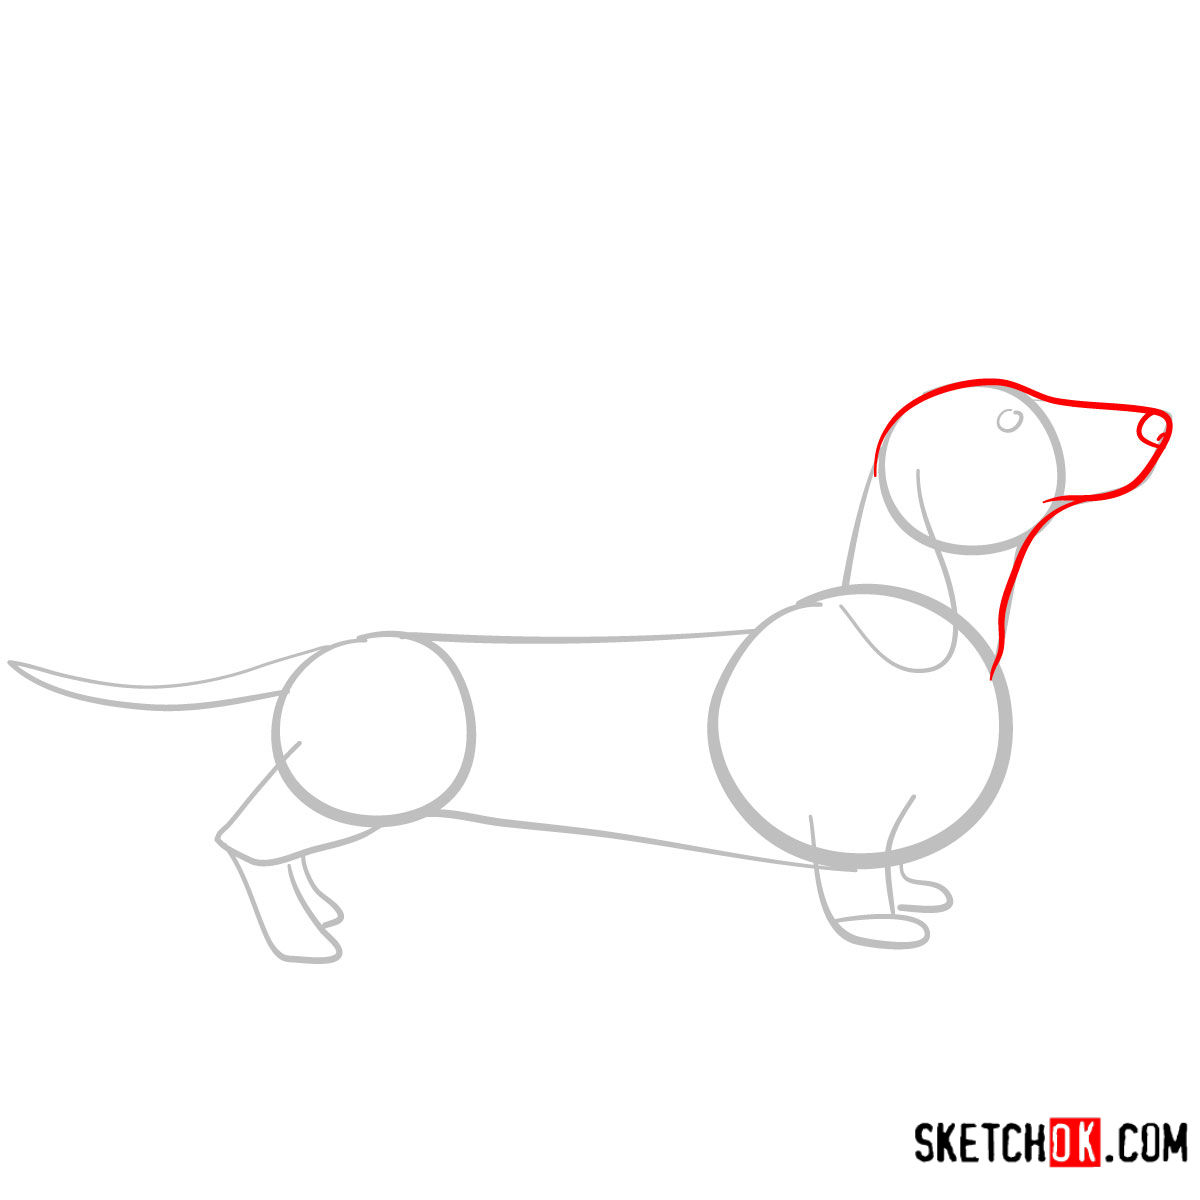 How to draw the Dachshund dog - step 03